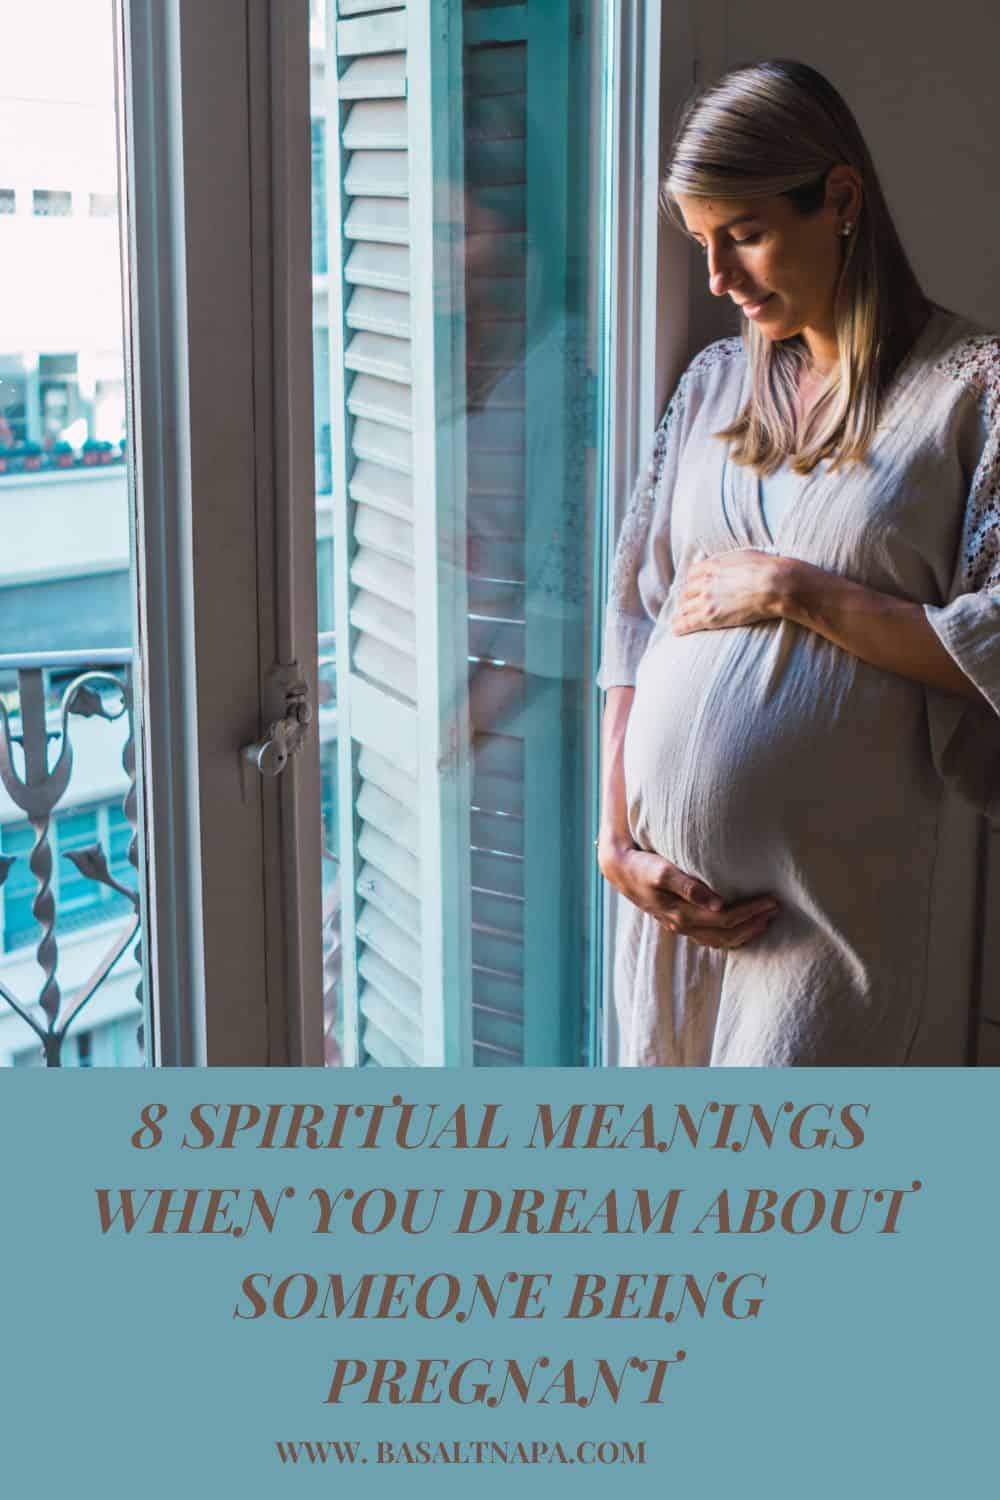 Dreaming of Another Person’s Pregnancy